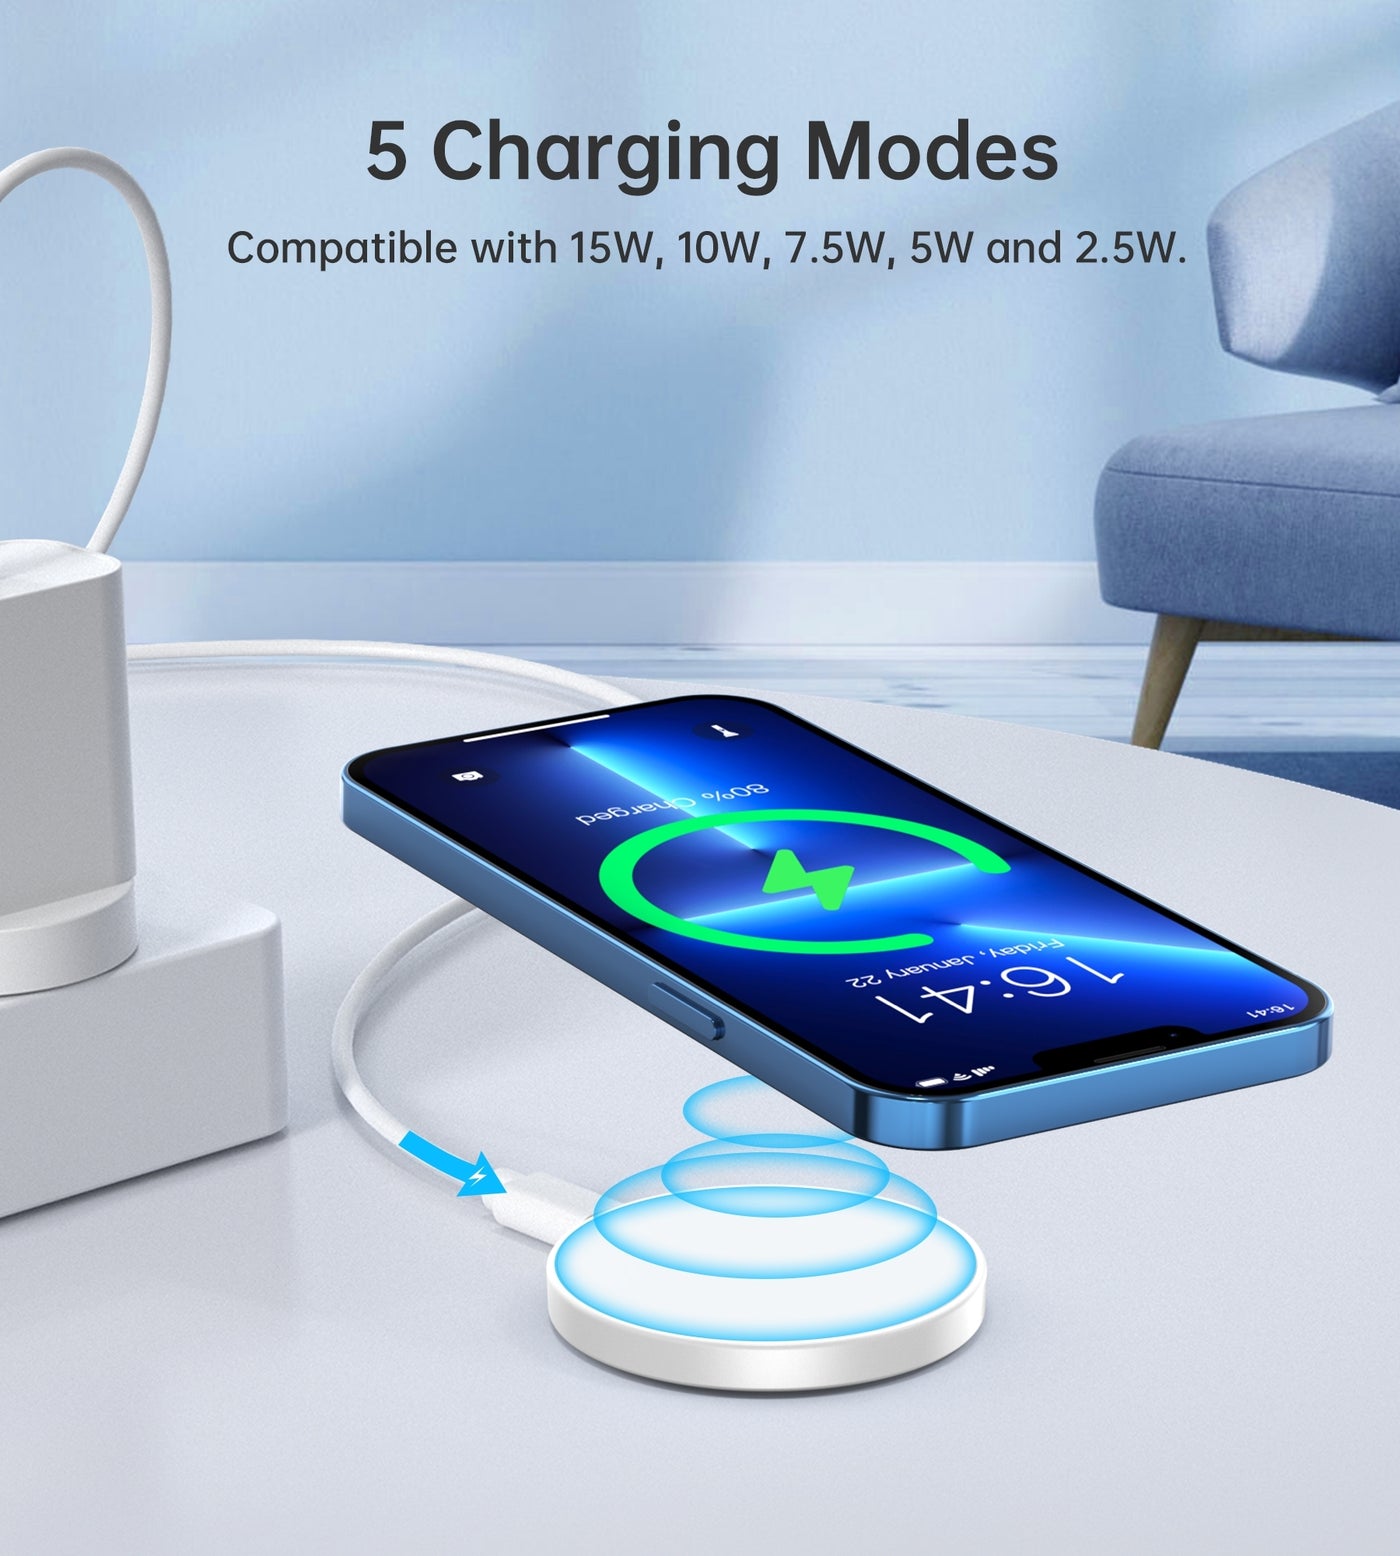 CHOETECH T603-F Ring Holder and Magnetic 15W Wireless Charger for Phone/airPod/iWatch